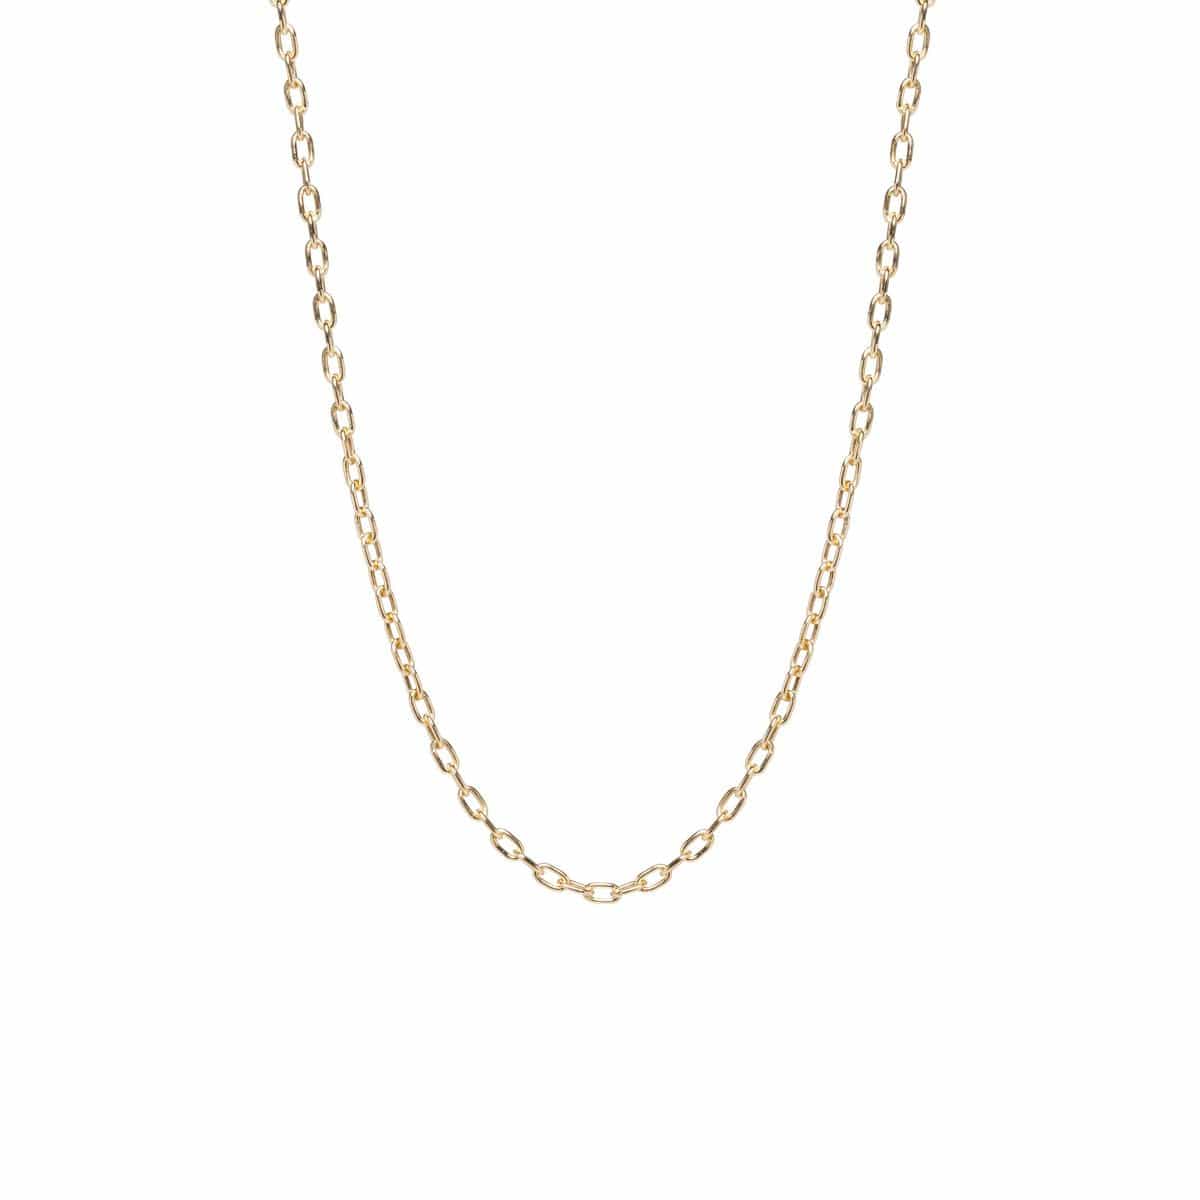 NKL-14K 14K Gold Small Square Oval Link Chain Necklace